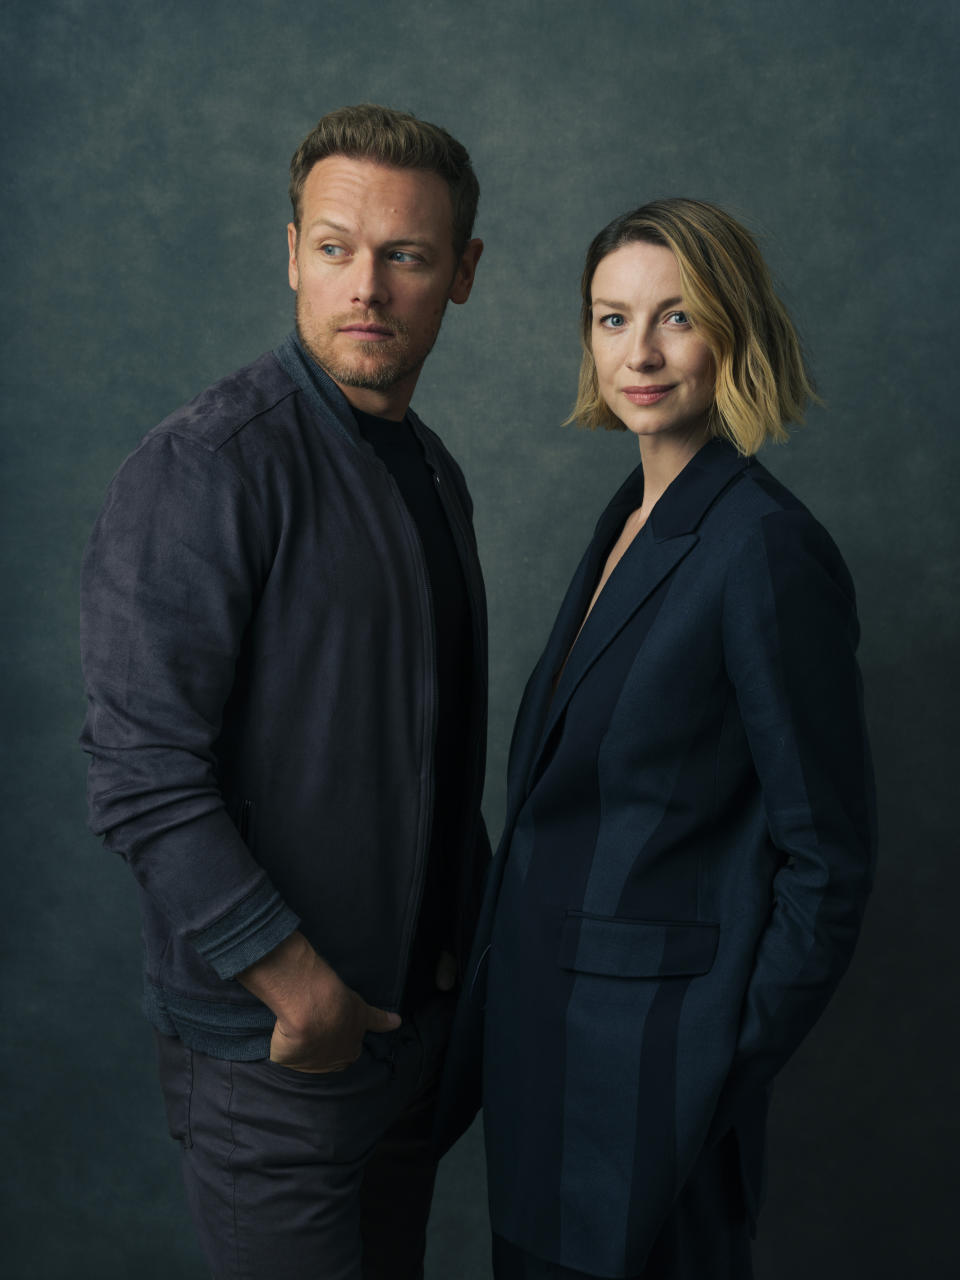 Sam Heughan, left, and Caitriona Balfe pose for a portrait to promote the series "Outlander" on Thursday, June 8, 2023, in New York. (Photo by Drew Gurian/Invision/AP)